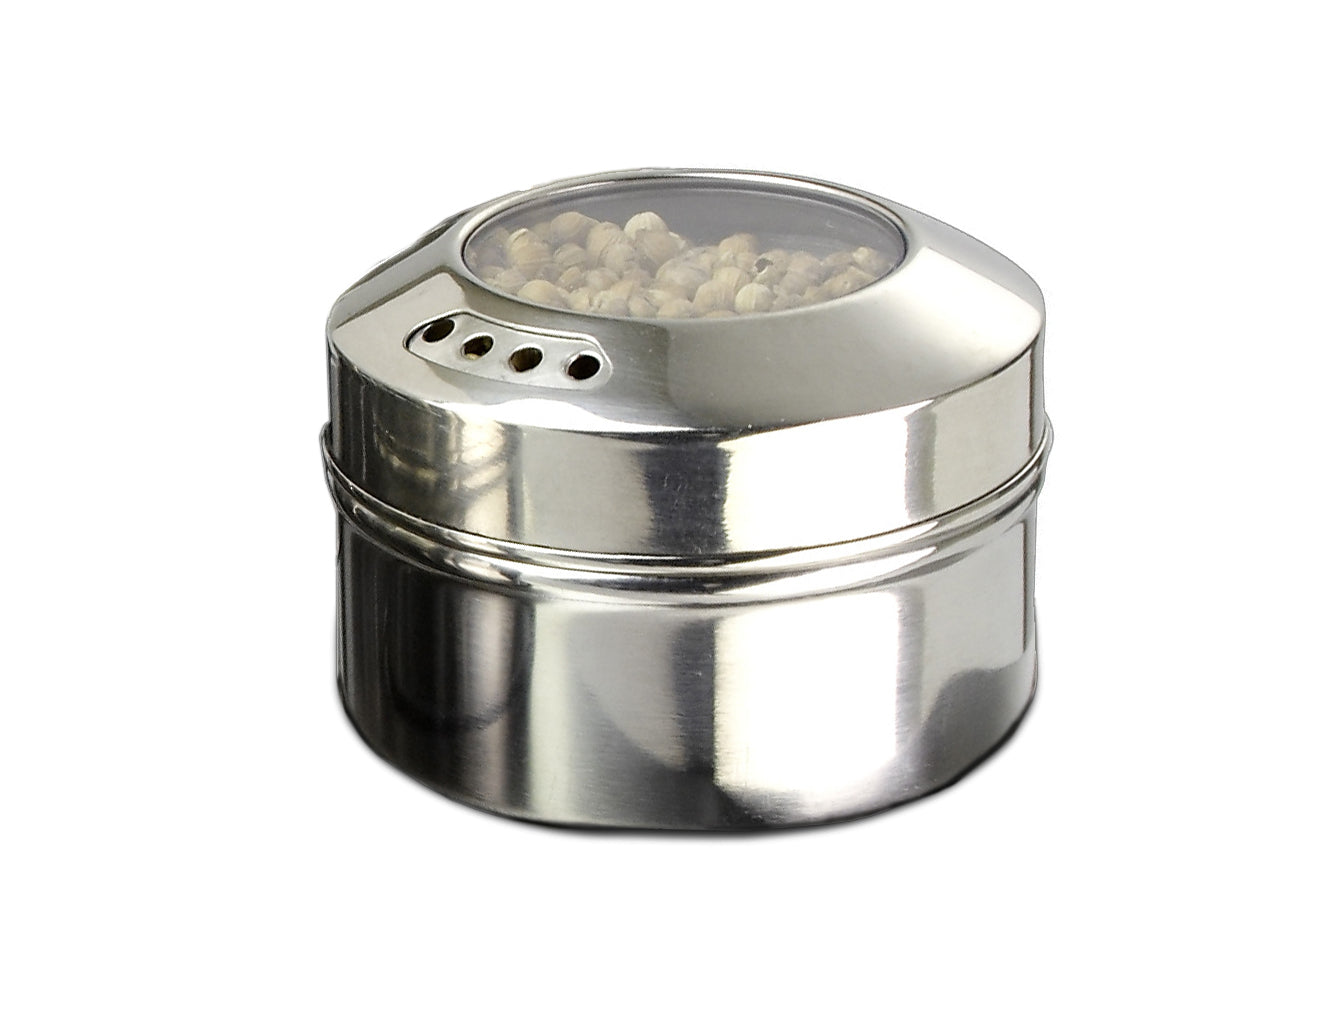 Magnetic Spice Canister / Shaker 